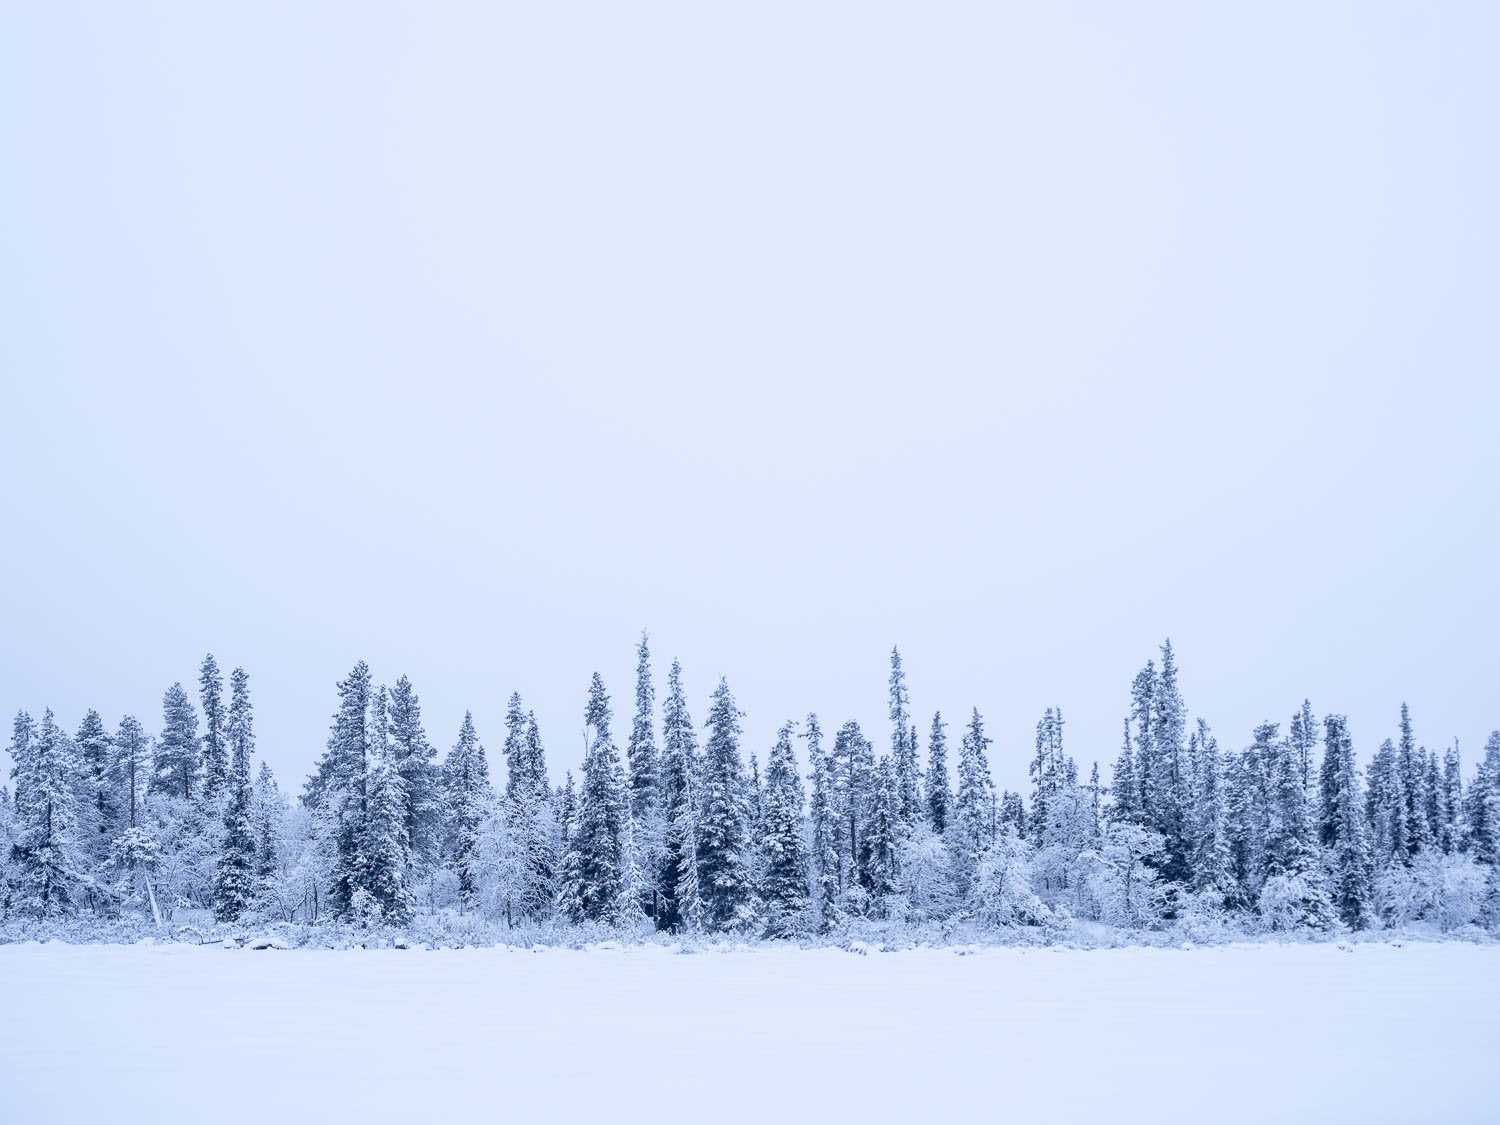 Series of long trees covered fully with snow, Sweden #25